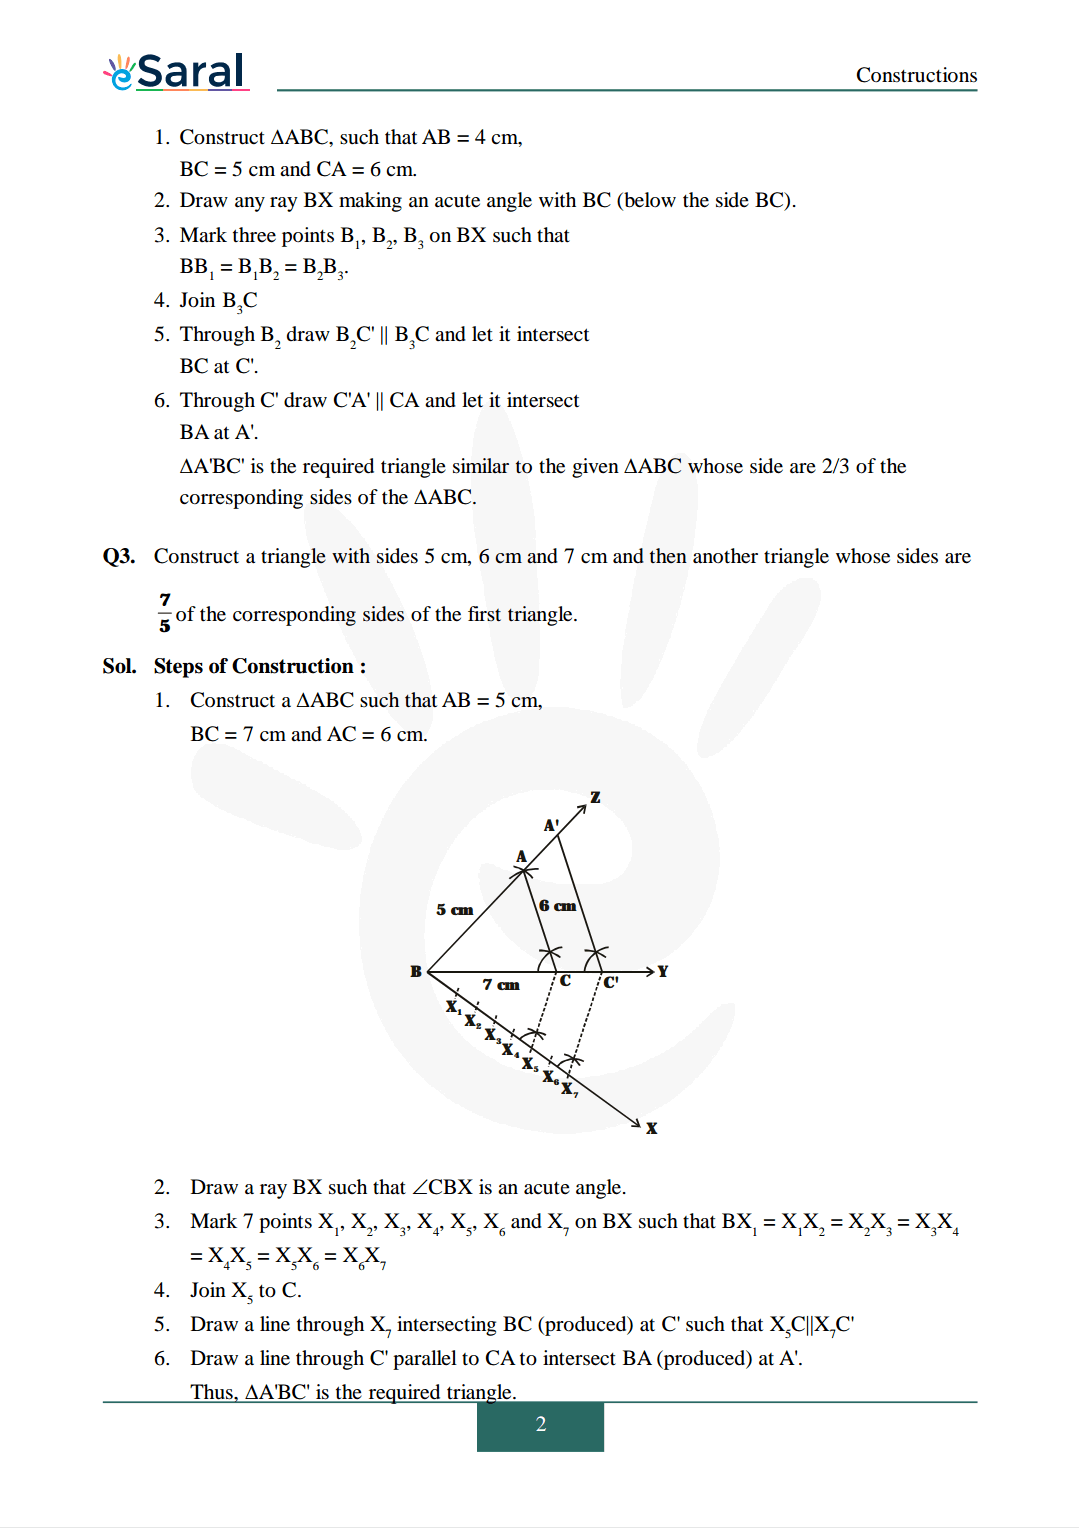 Class 10 Maths Chapter 11 exercise 11.1 solutions Image 2